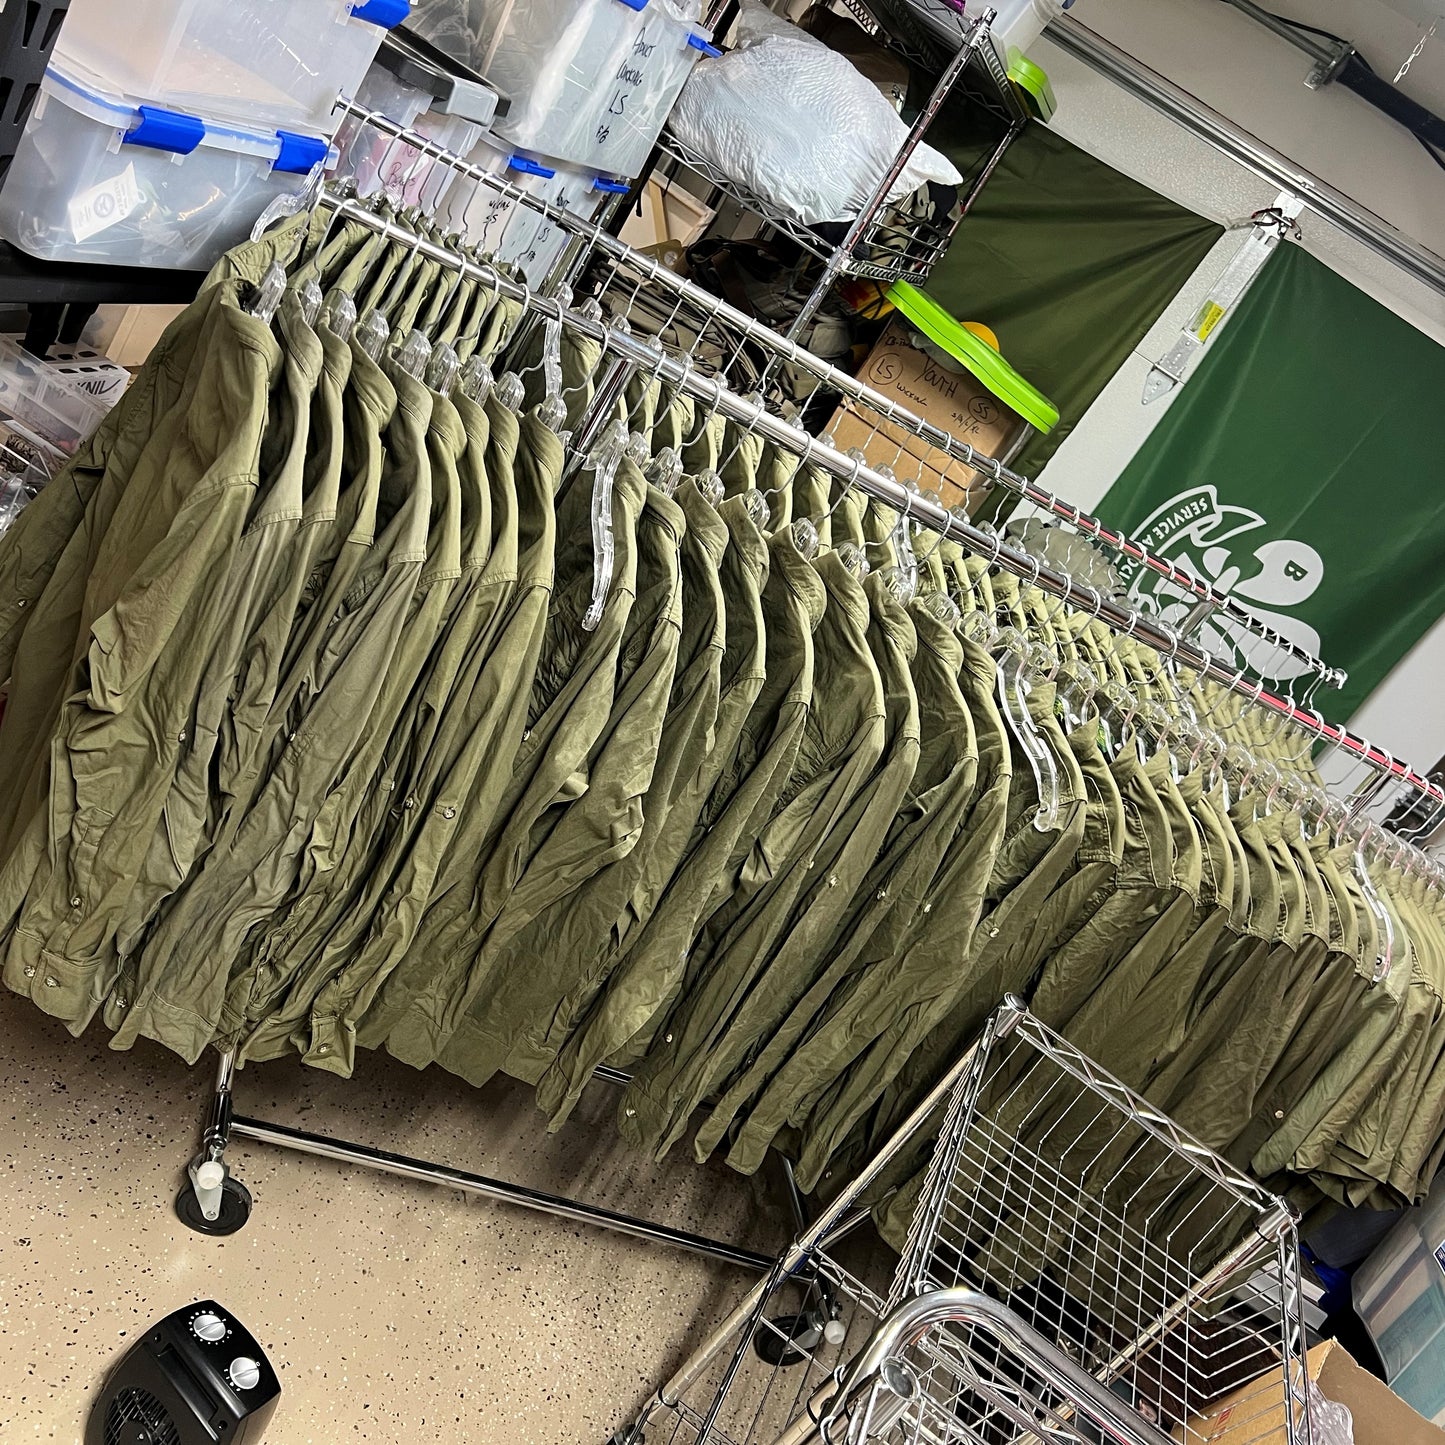 All Rover Section Uniform Shirts, Women's Sizes